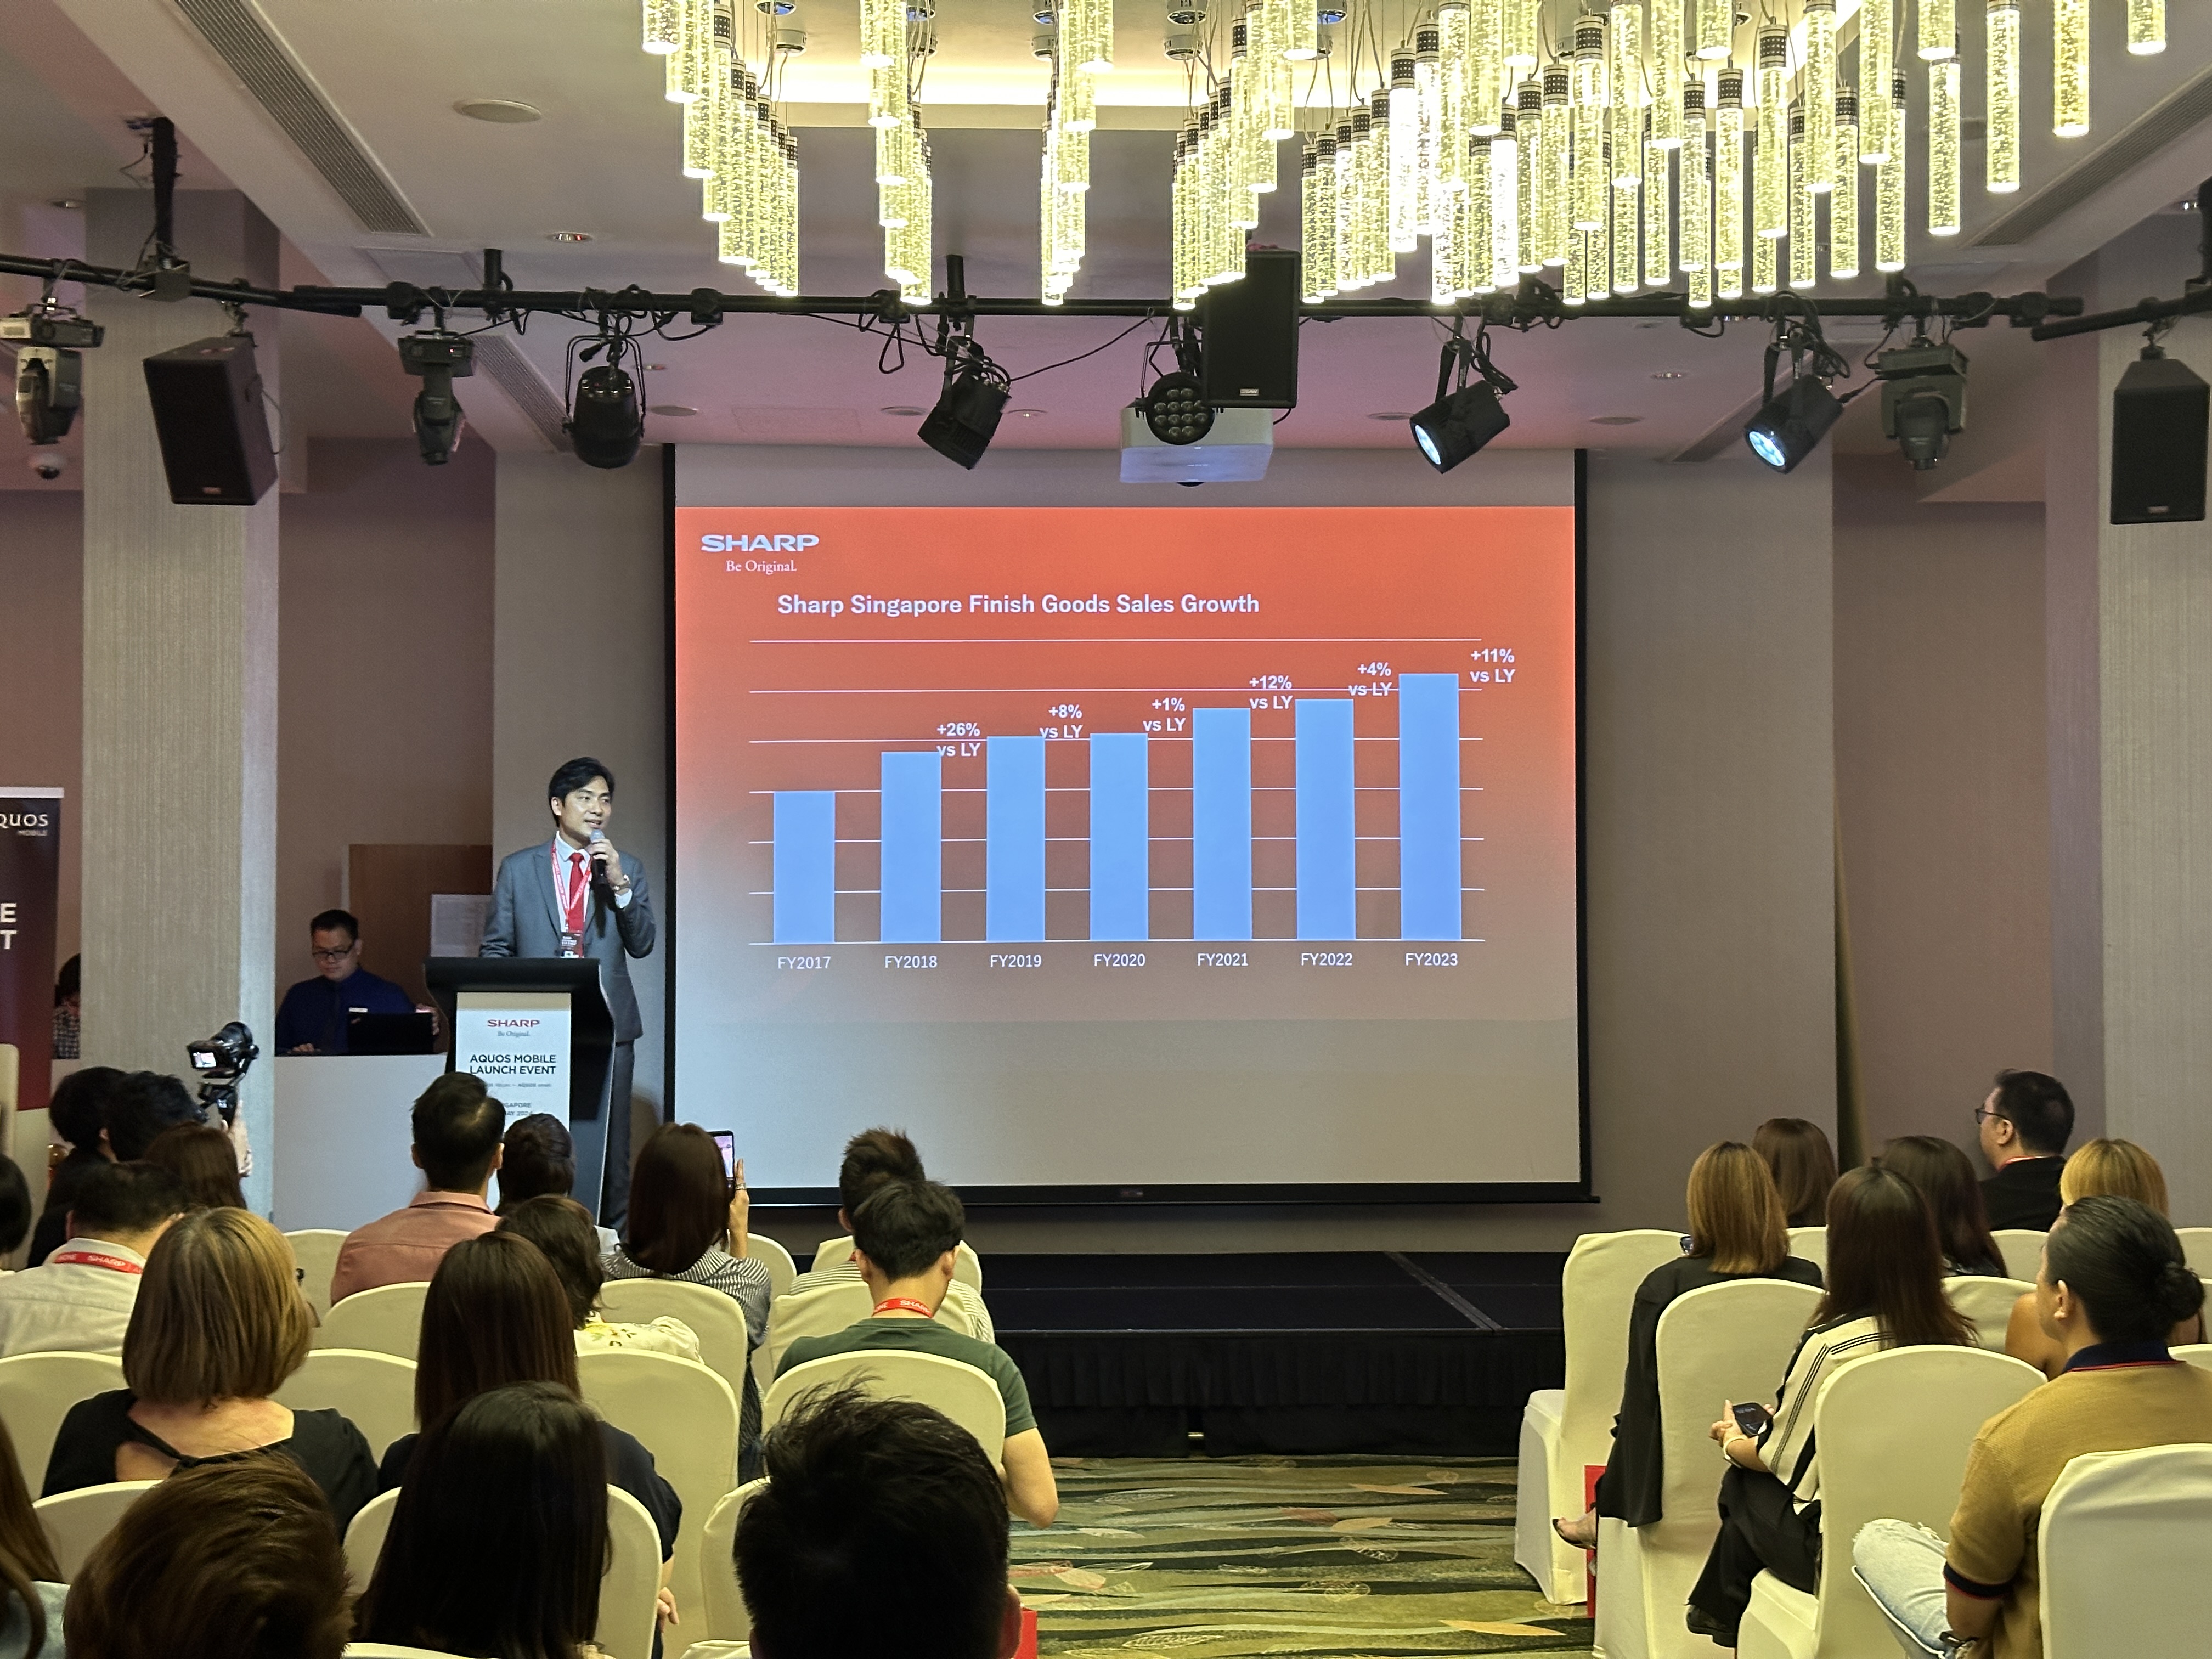 Mr Woo, MD of Sharp Singapore presenting YOY sales growth during the media preview